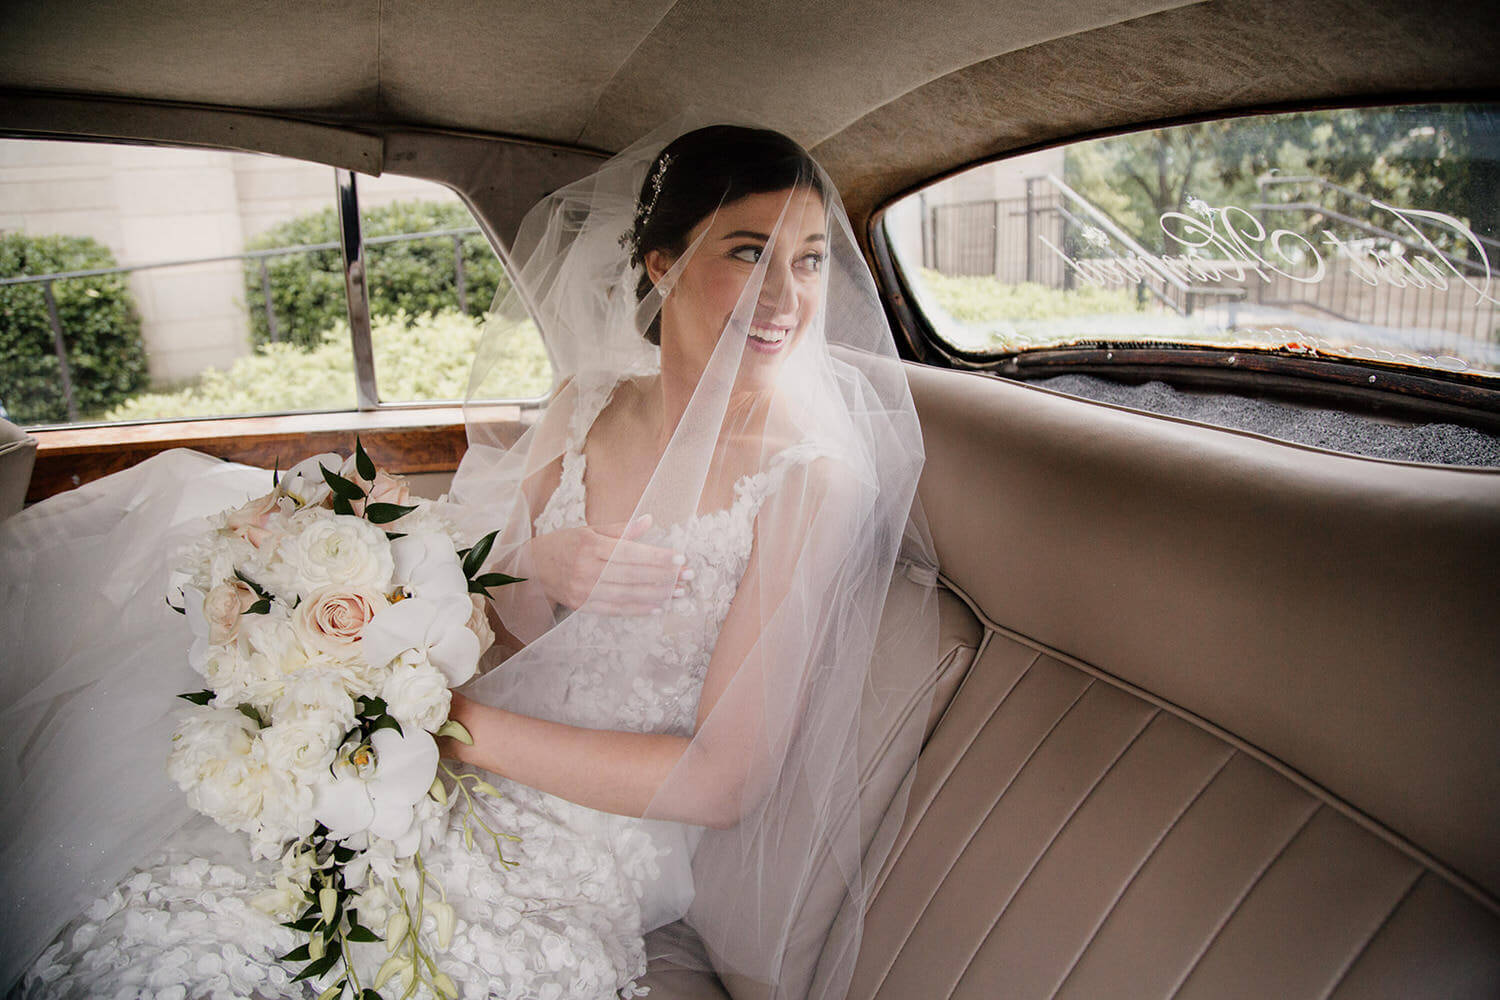 Bride waiting in the car